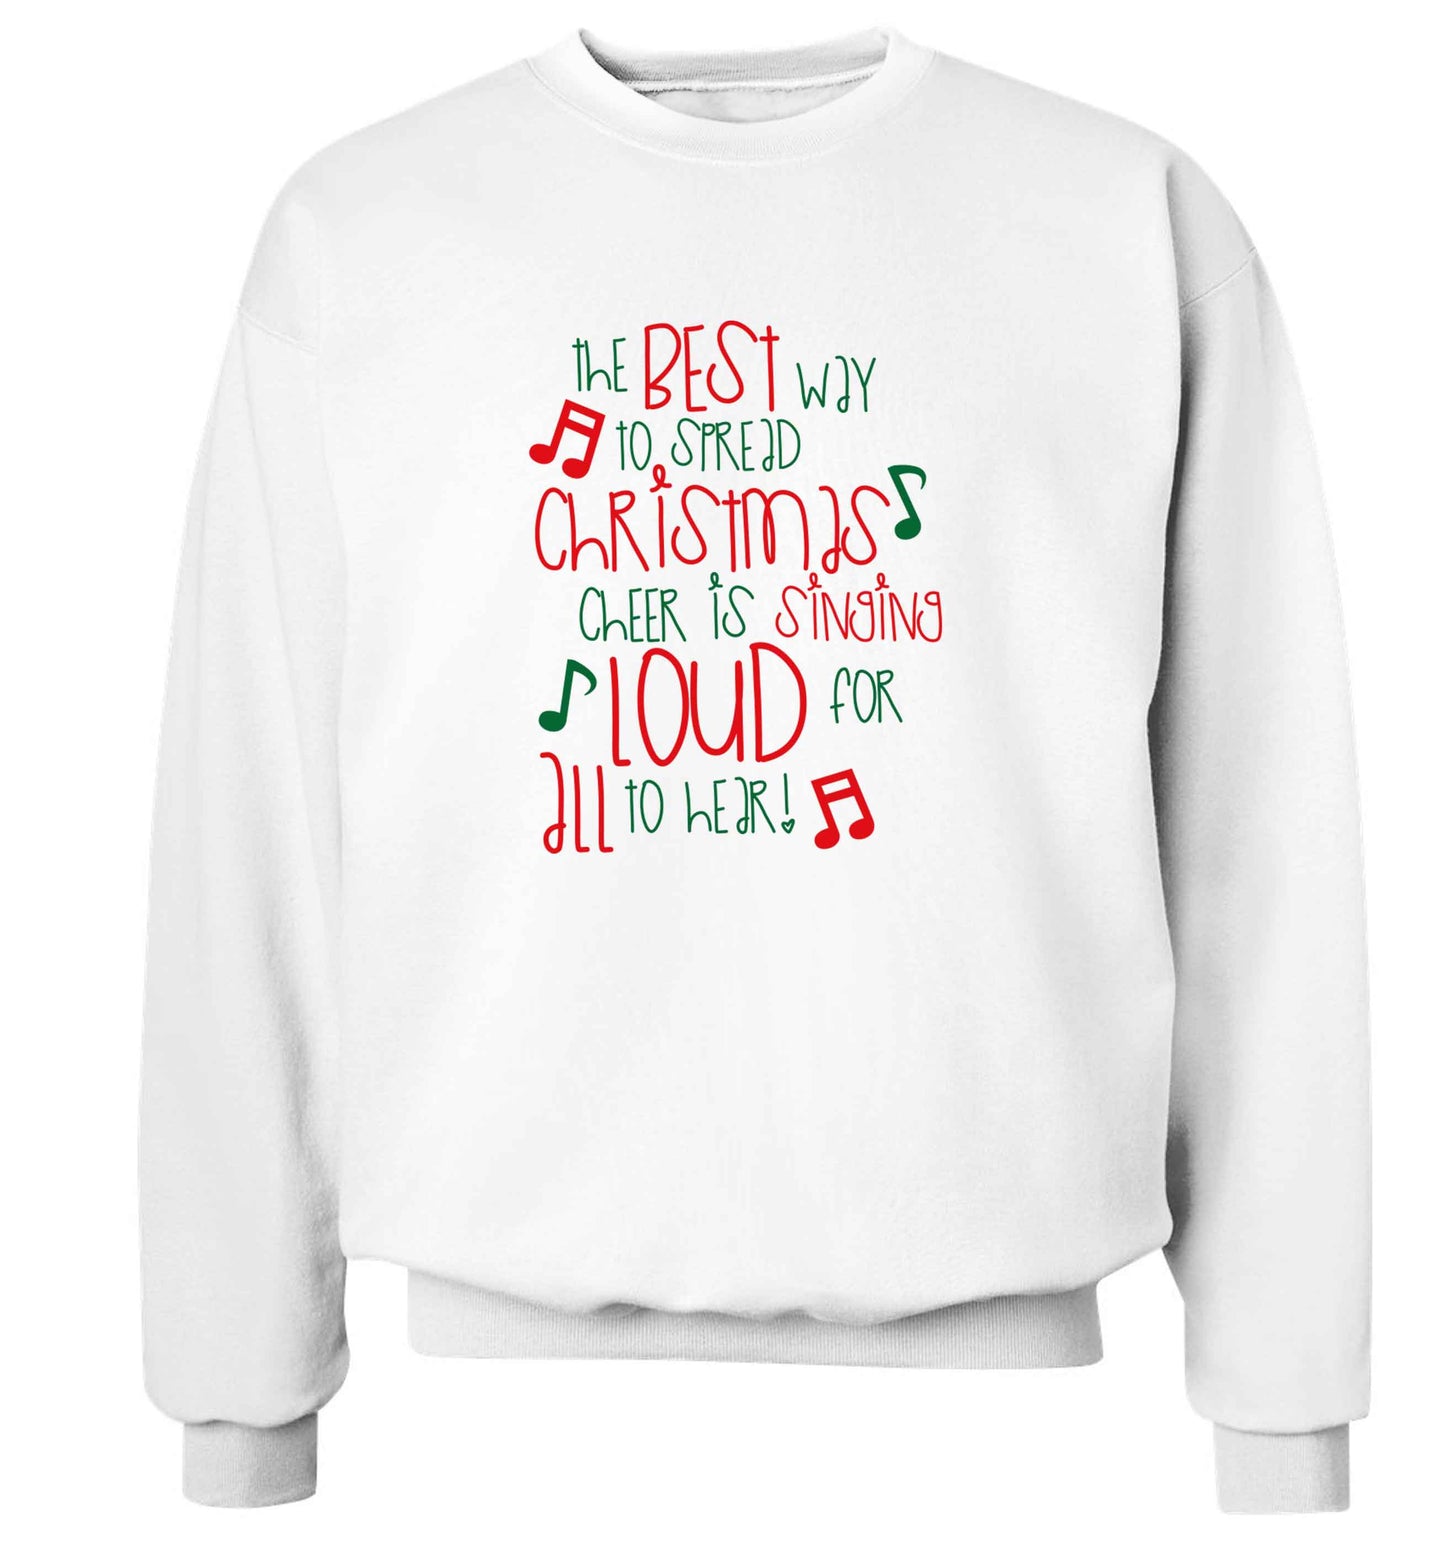 The best way to spread Christmas cheer is singing loud for all to hear adult's unisex white sweater 2XL